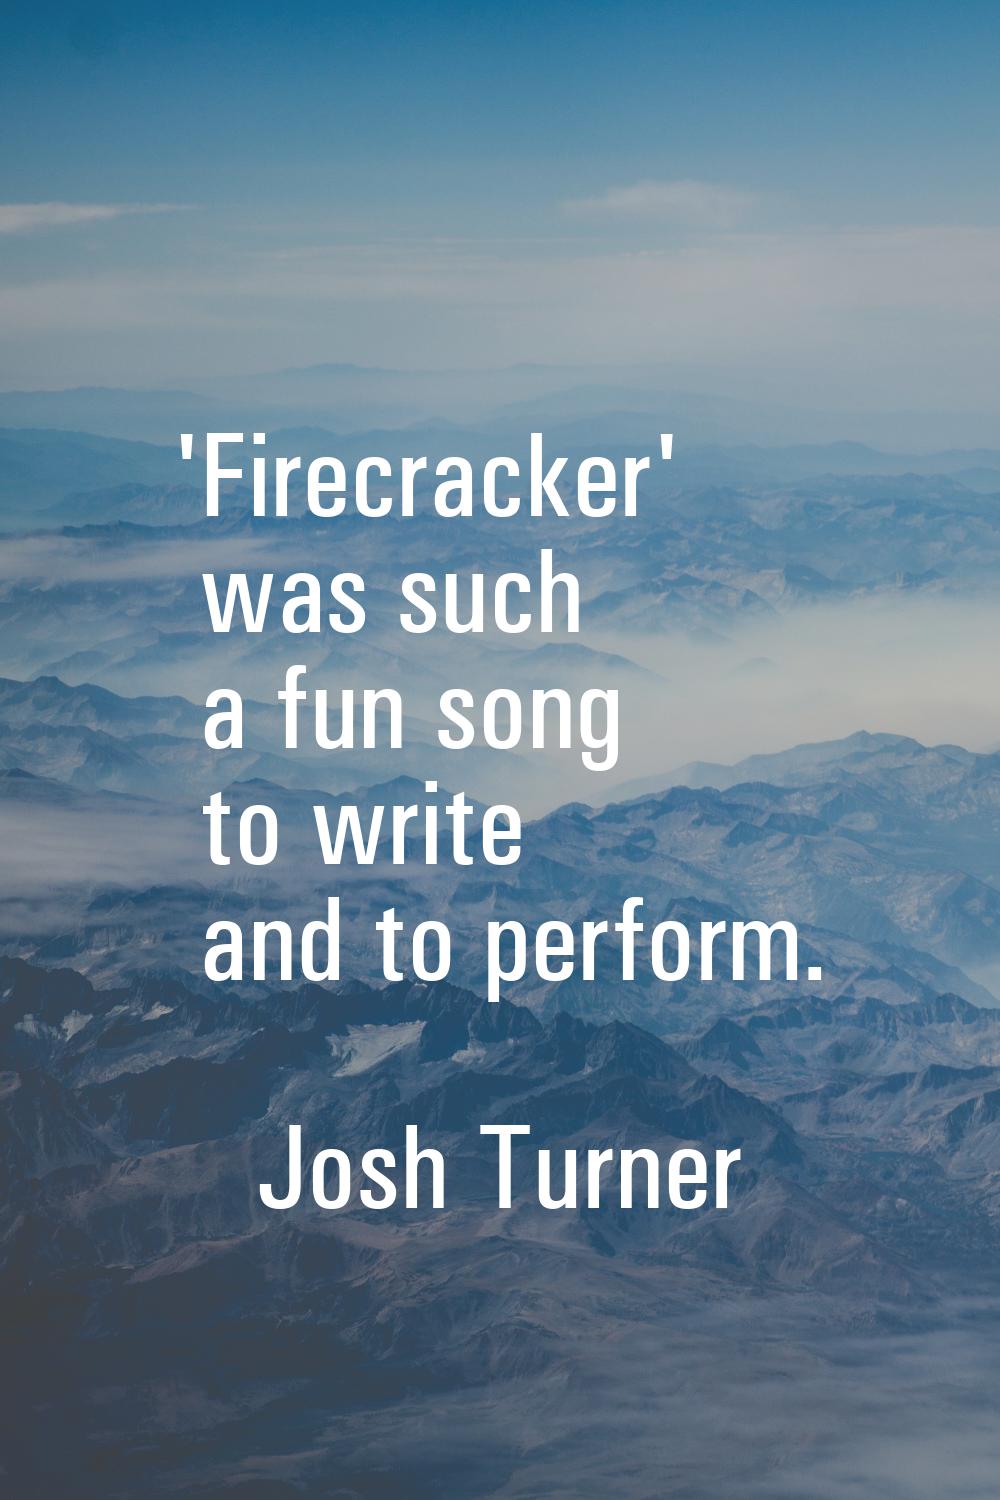 'Firecracker' was such a fun song to write and to perform.